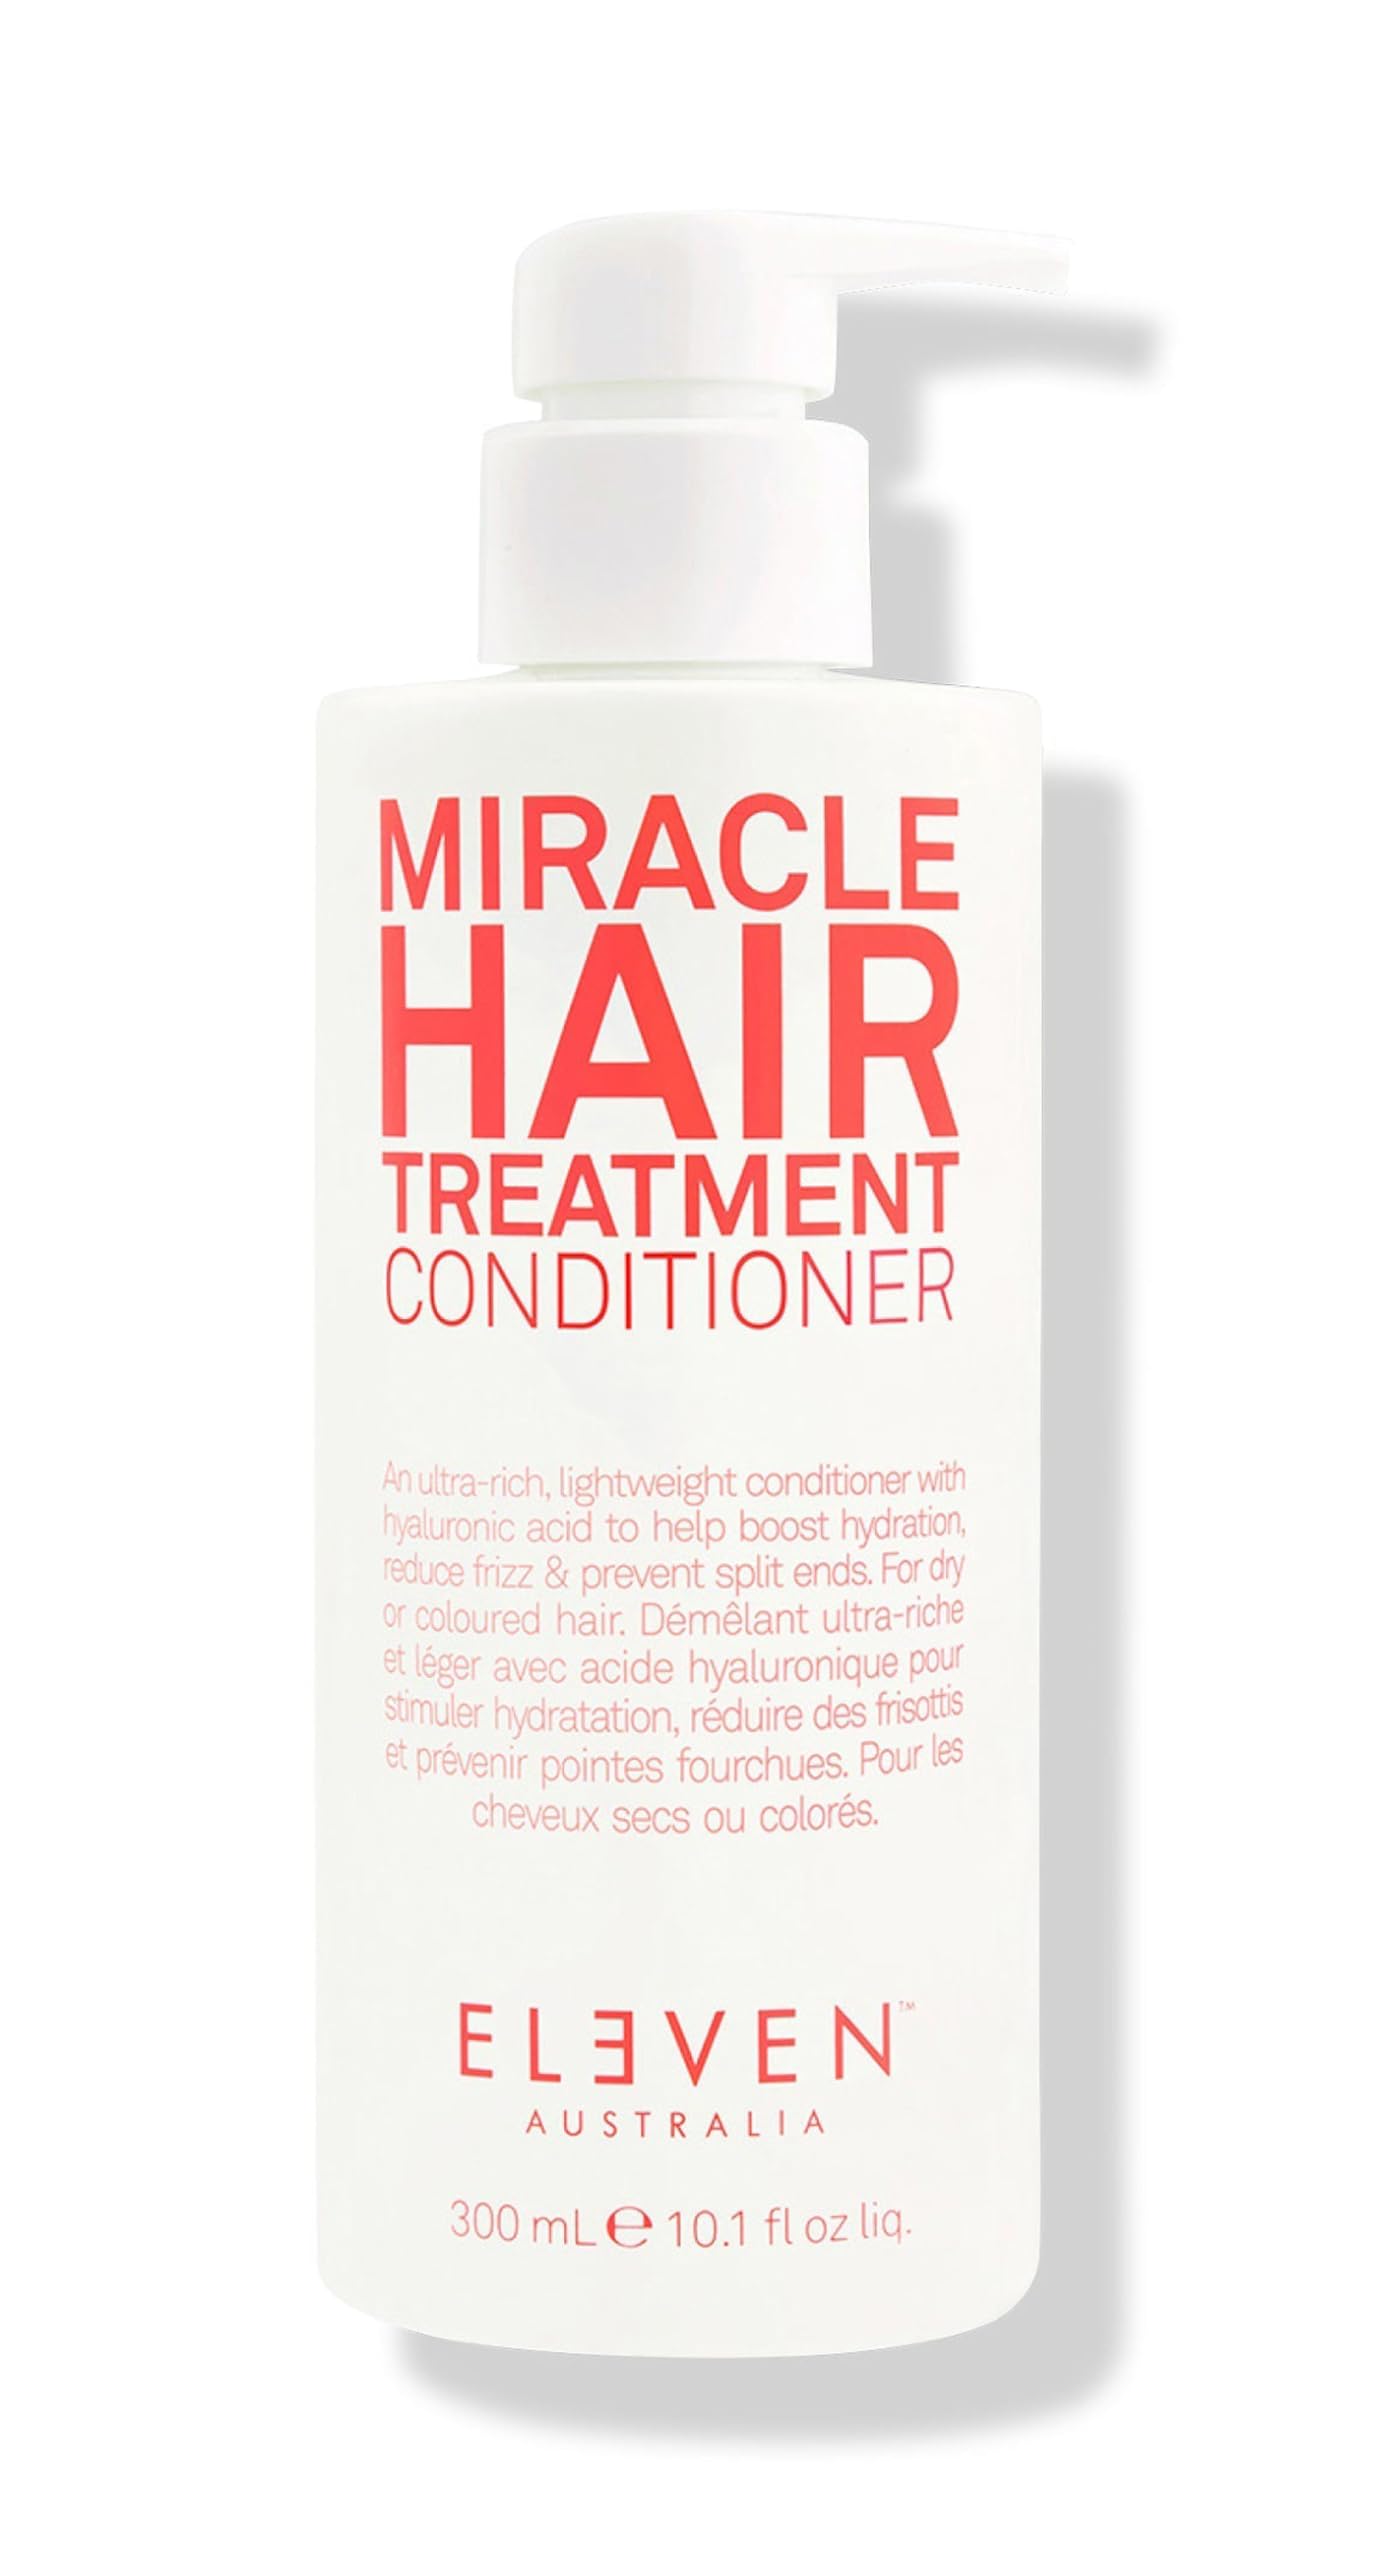 ELEVEN AUSTRALIA Miracle Hair Treatment Conditioner